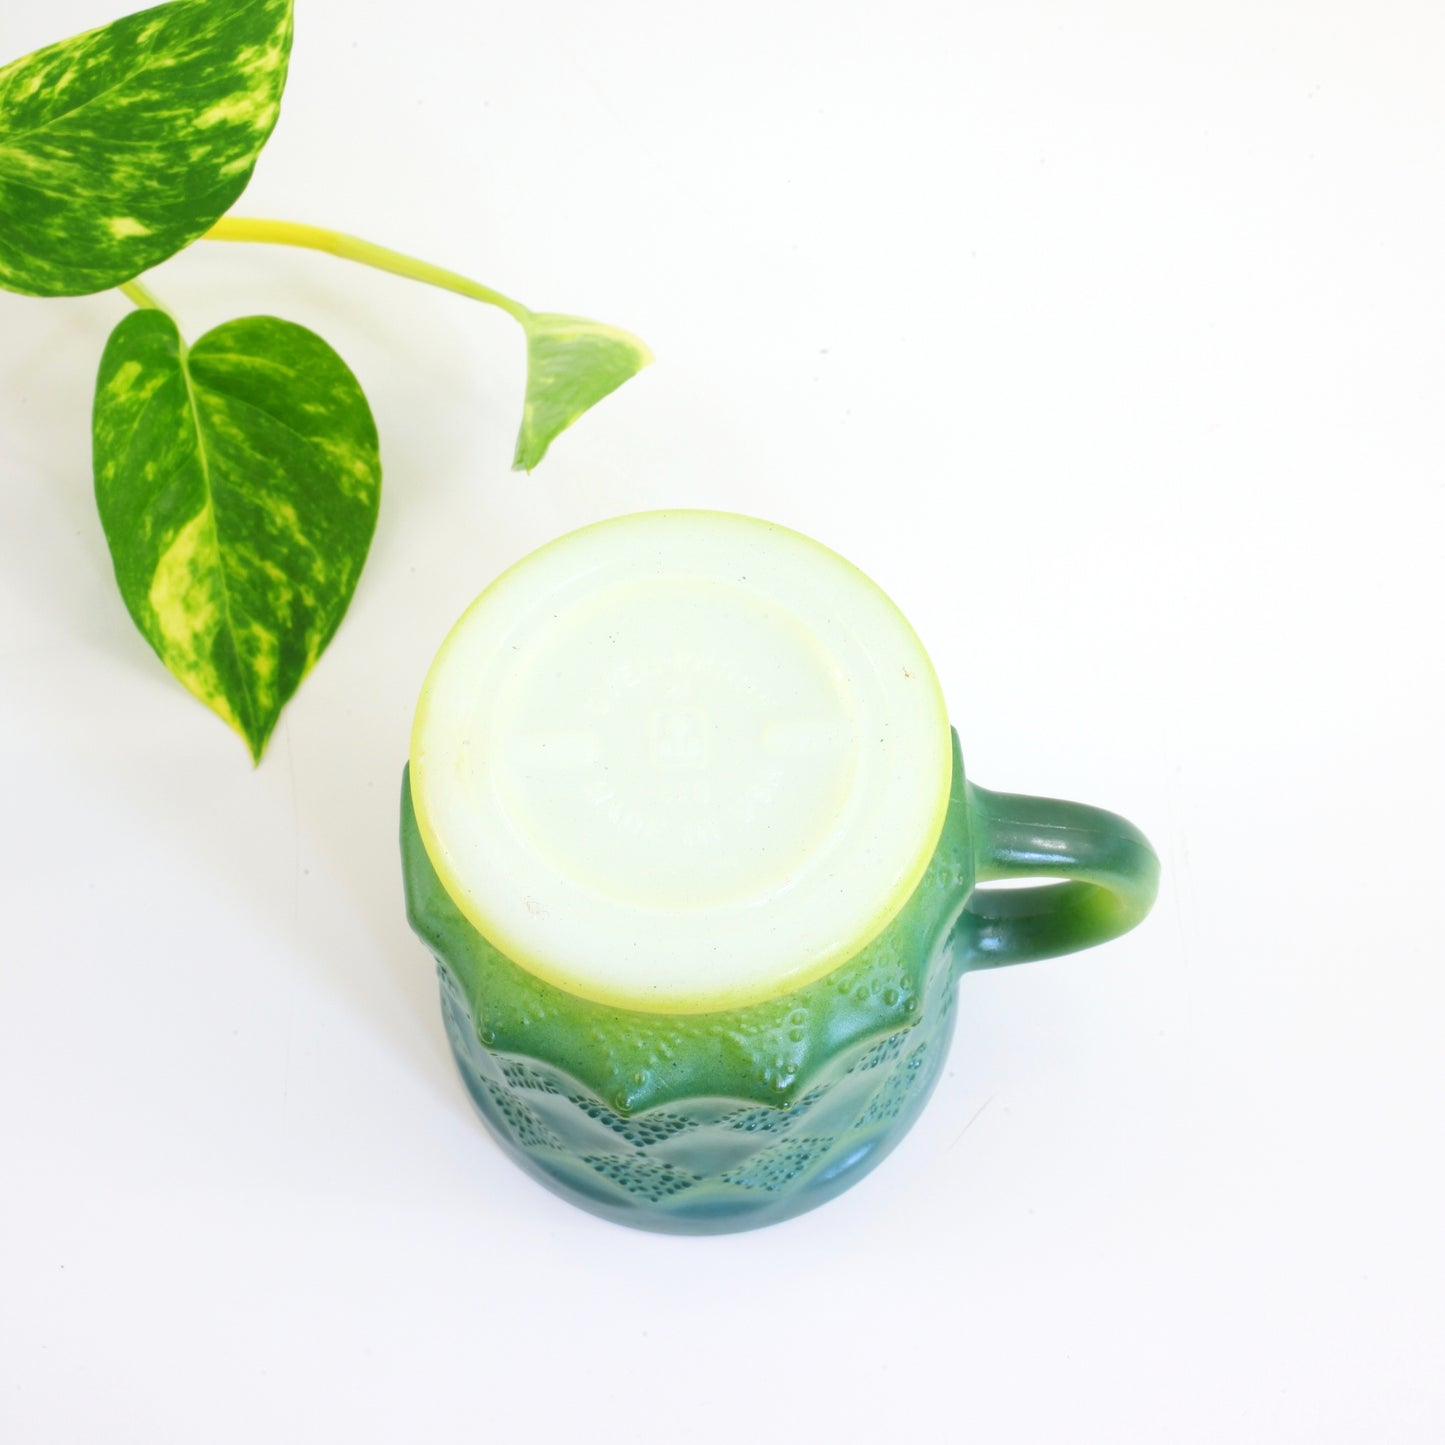 SOLD - Vintage Anchor Hocking Green Ombre Kimberly Milk Glass Mug